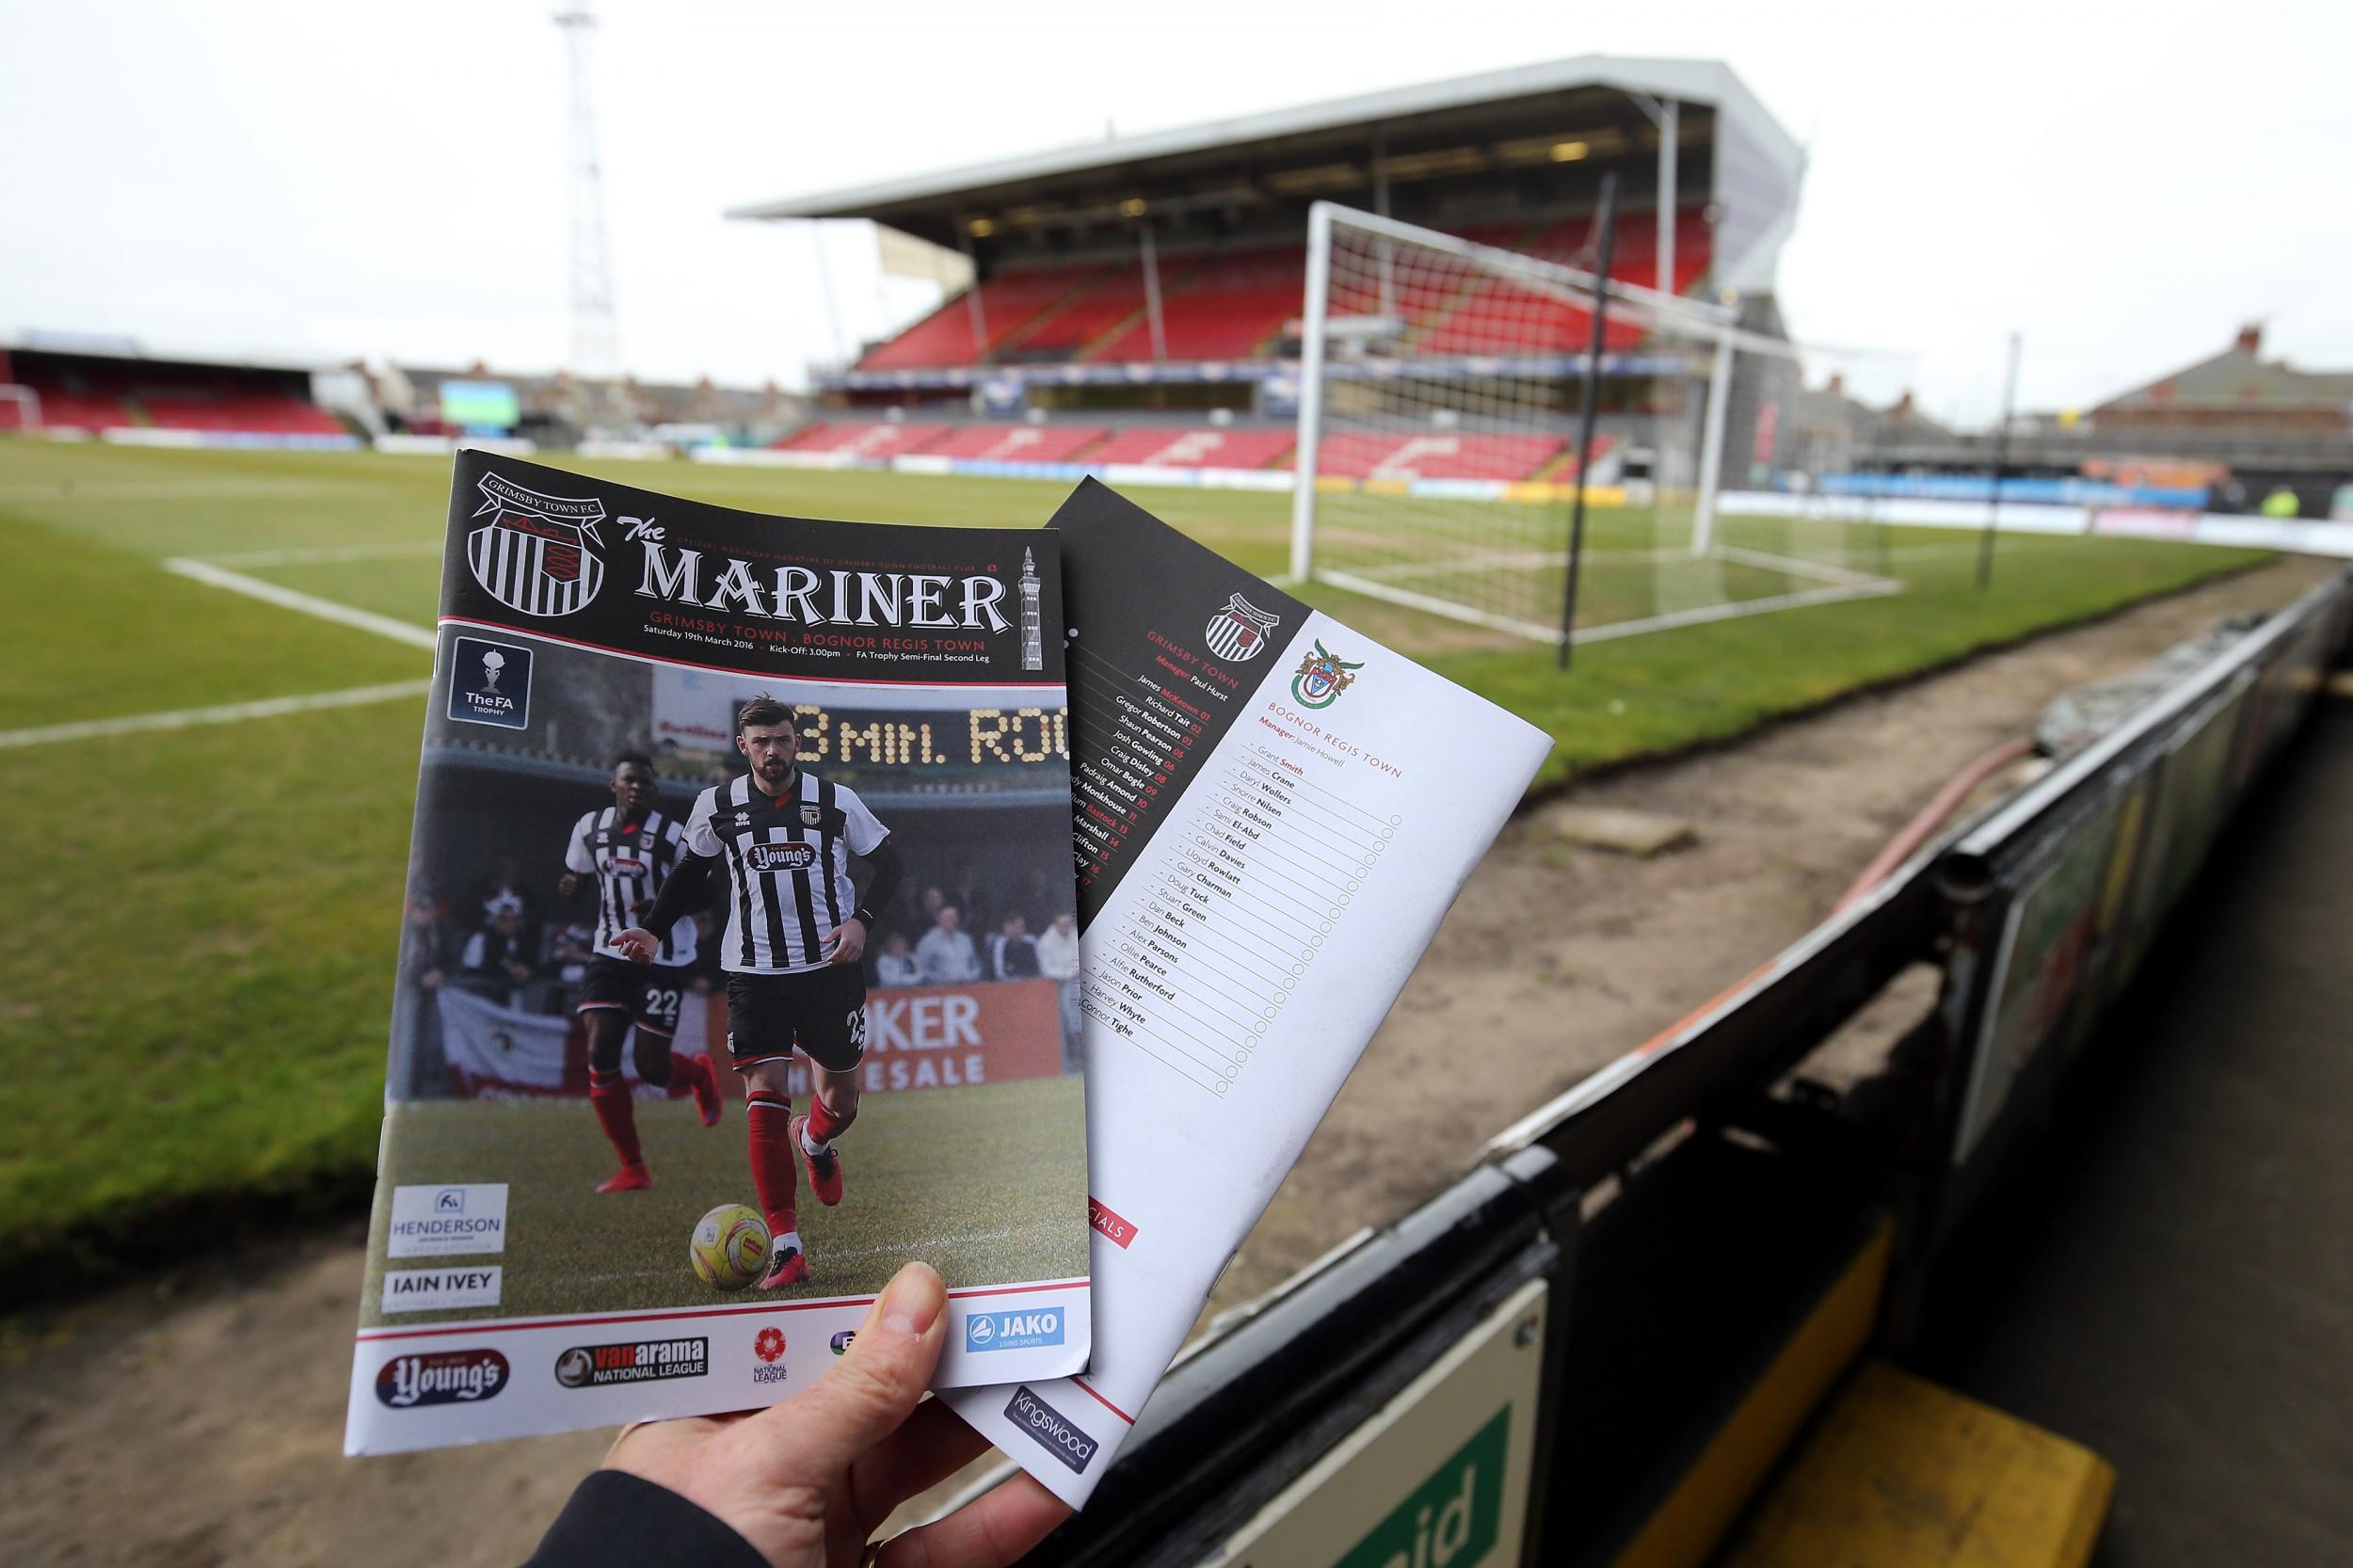 Grimsby's home, Blundell Park, has its own unique charm